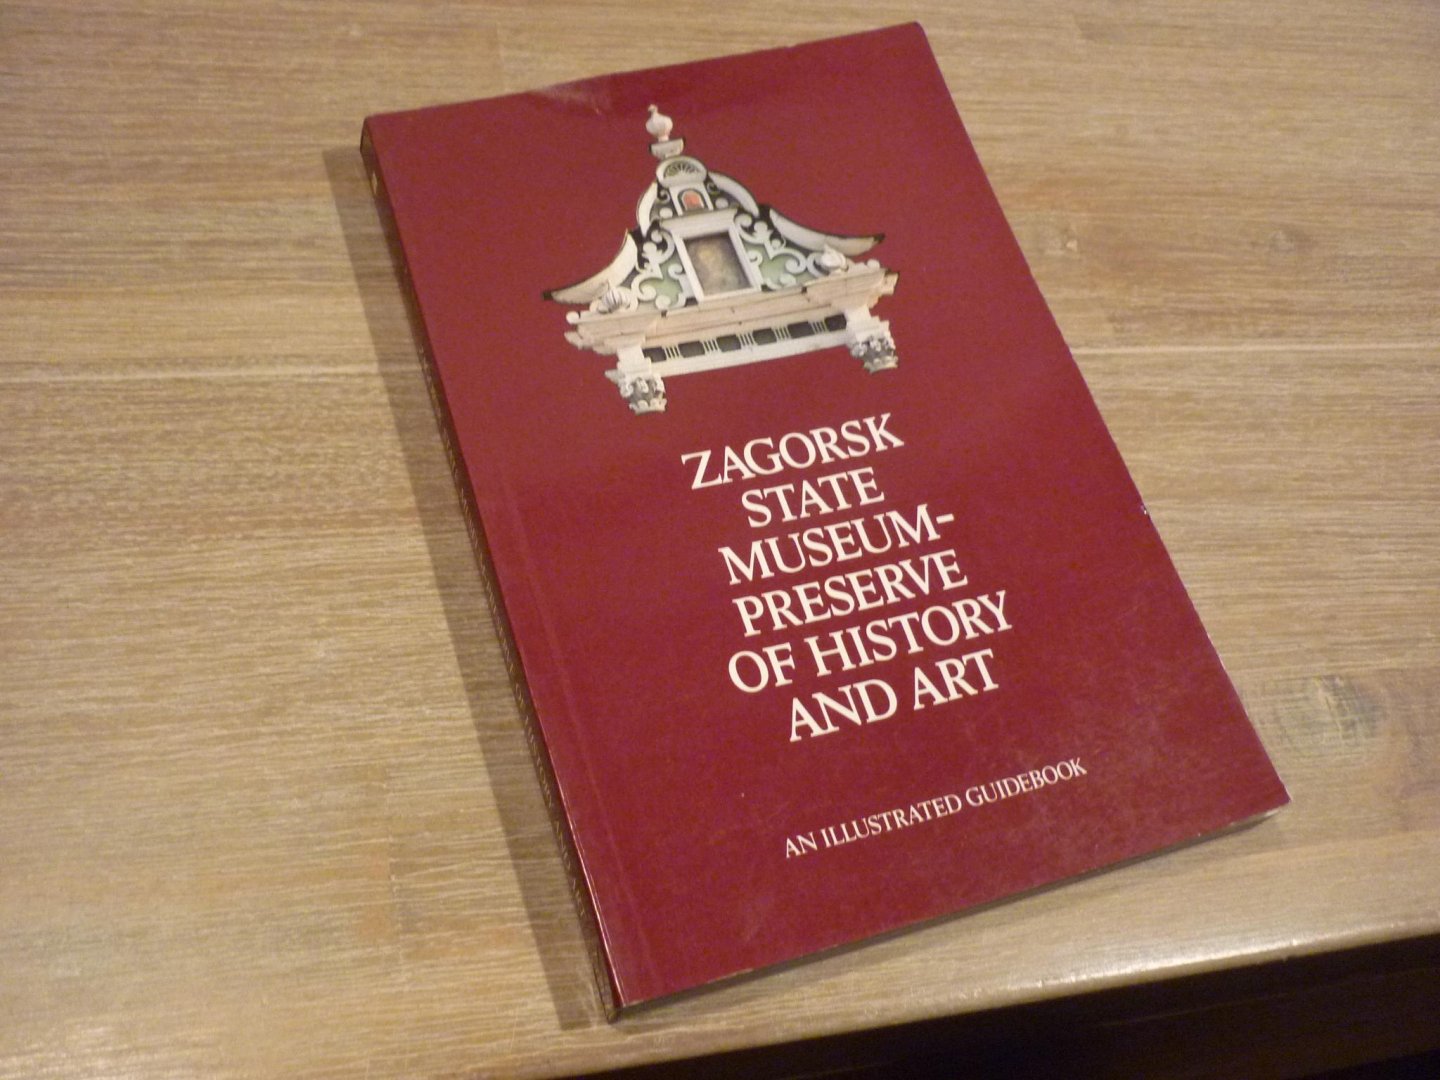  - ZAGORSK STATE MUSEUM-PRESERVE OF HISTORY AND ART , AN ILLUSTRATED GUIDEBOOK , 1989